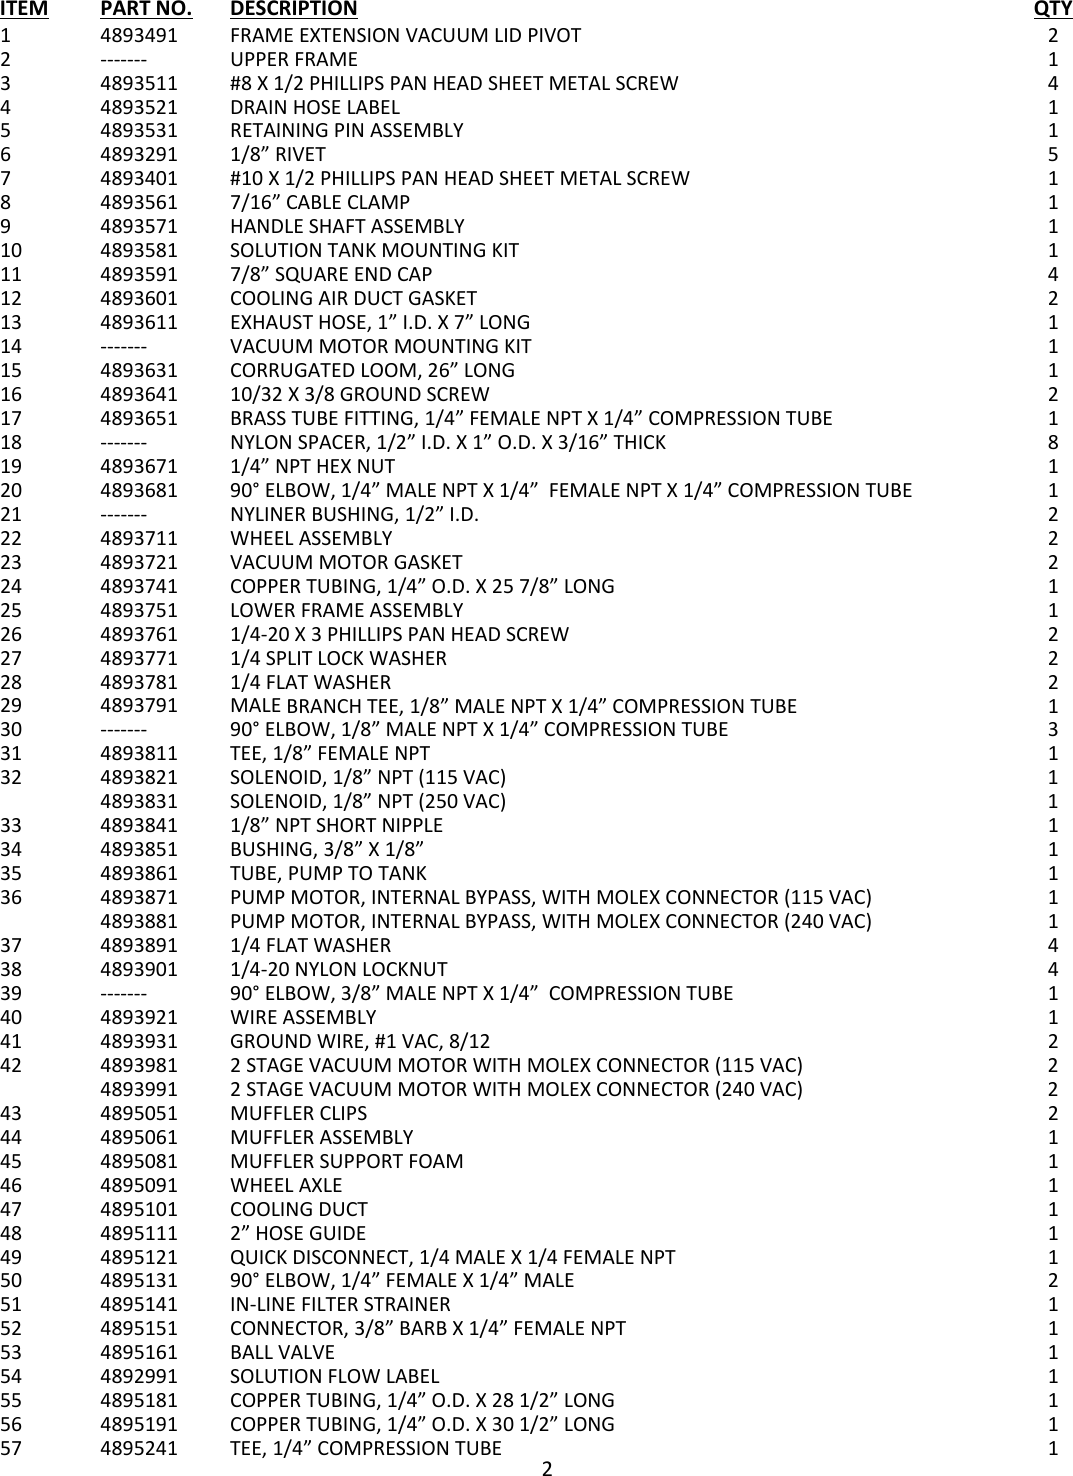 Page 2 of 12 - 9094812 Stallion 12SC Lllustrated Parts Book  Nss-stallion-12sc-carpet-extractor-parts-manual